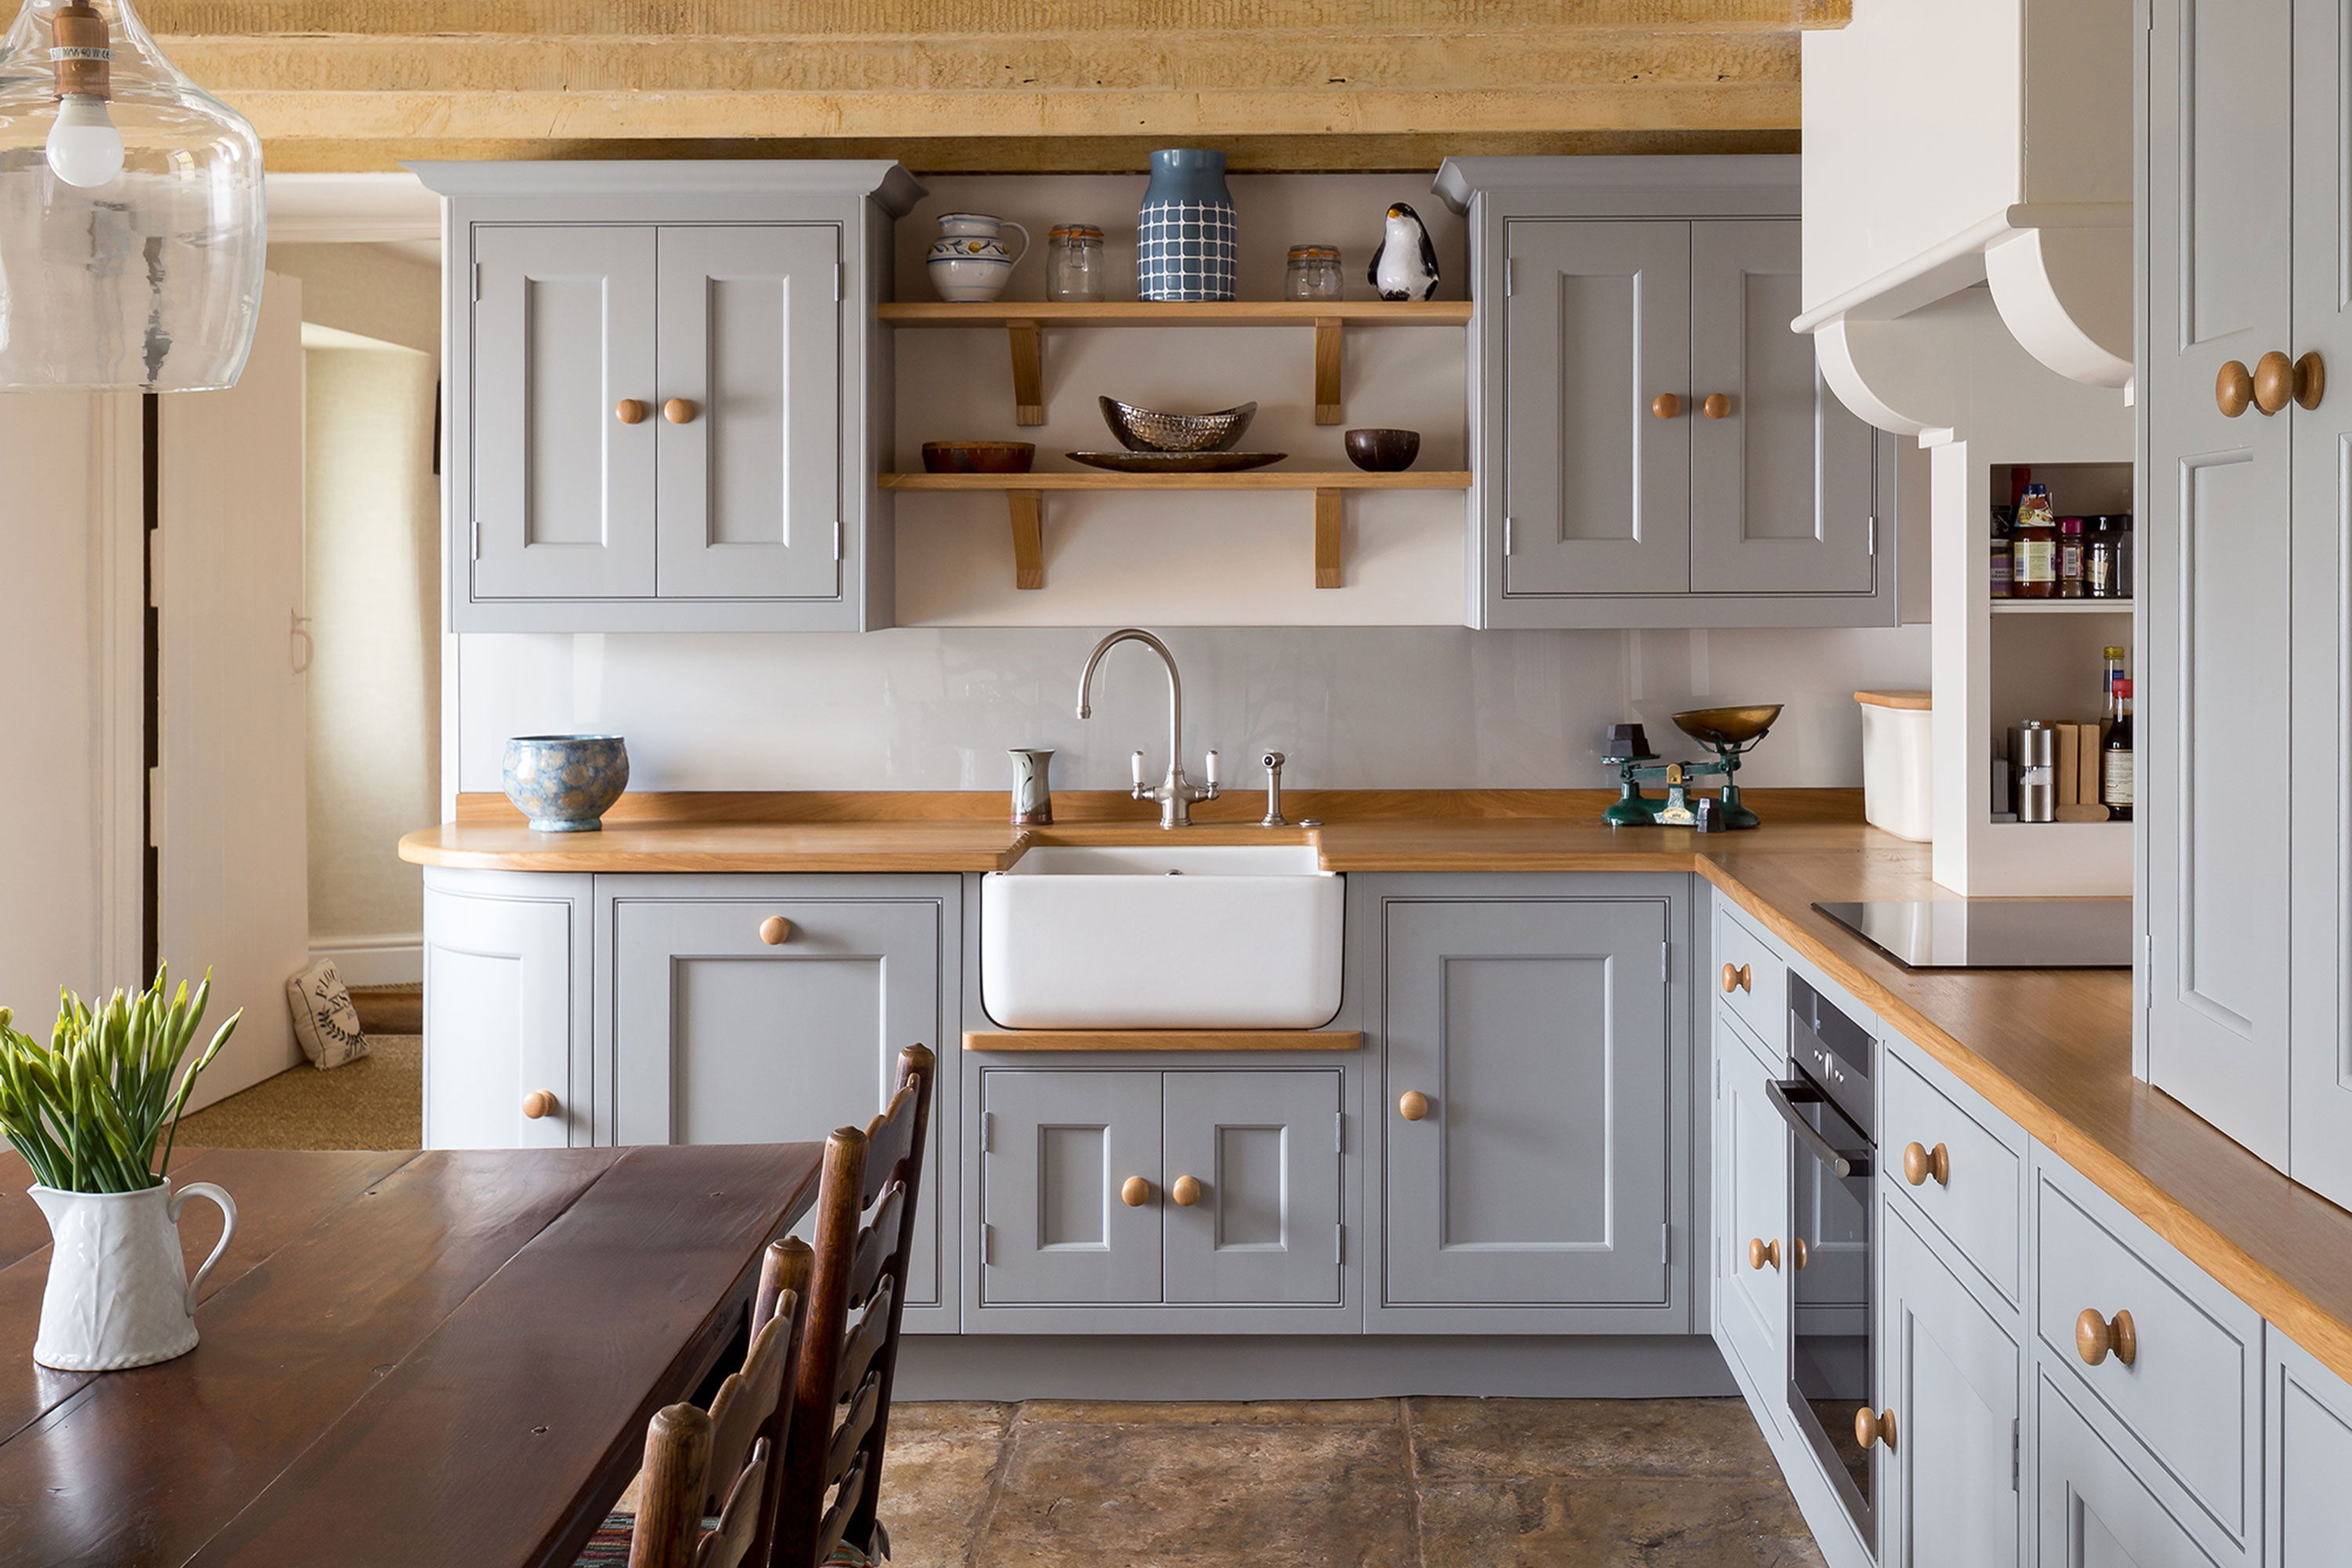 How to achieve a farmhouse kitchen look – the materials and ...